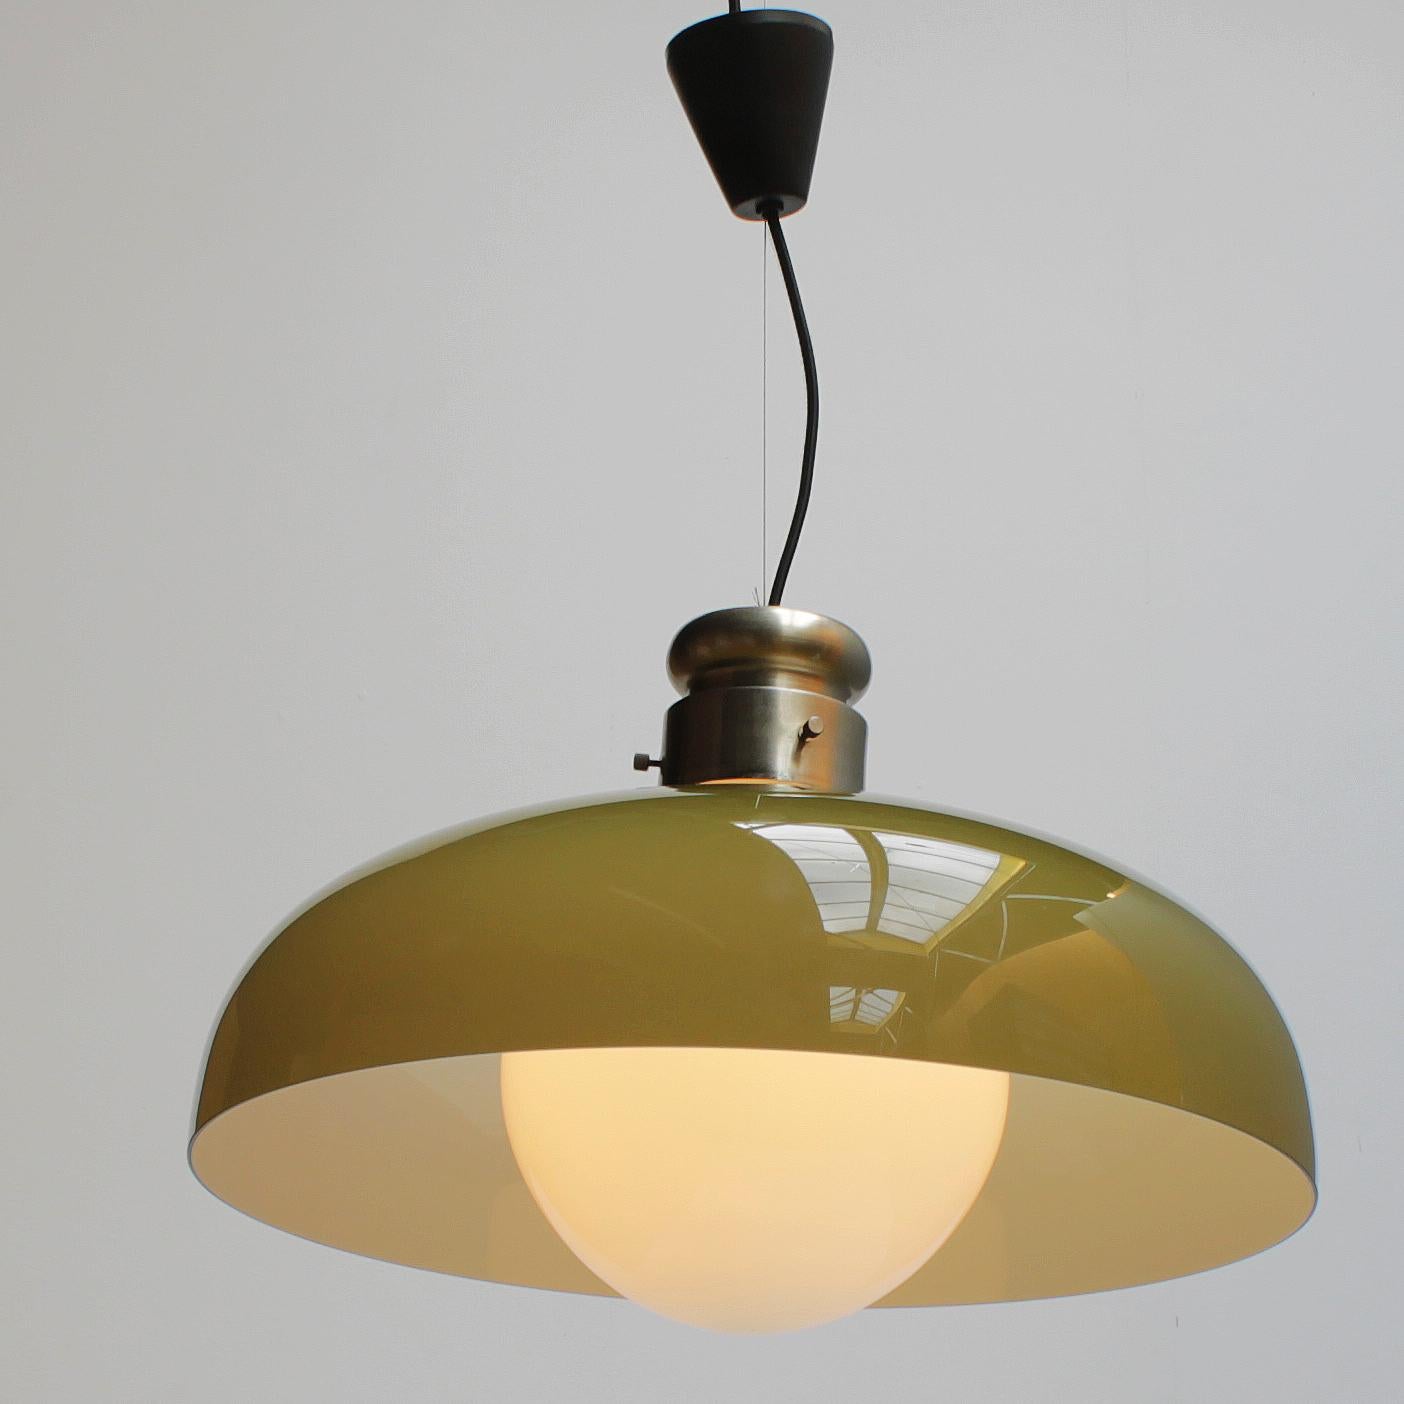 Large cased glass Italian pendant by Alessandro Pianon for Vistosi, 1960.
Dimensions fixture: height 12.2 inches (31 cm), diameter 19.7 inches (50 cm). From ceiling till drop: 51.2 inches (130 cm).
The fixture on offer is equipped with one bulb